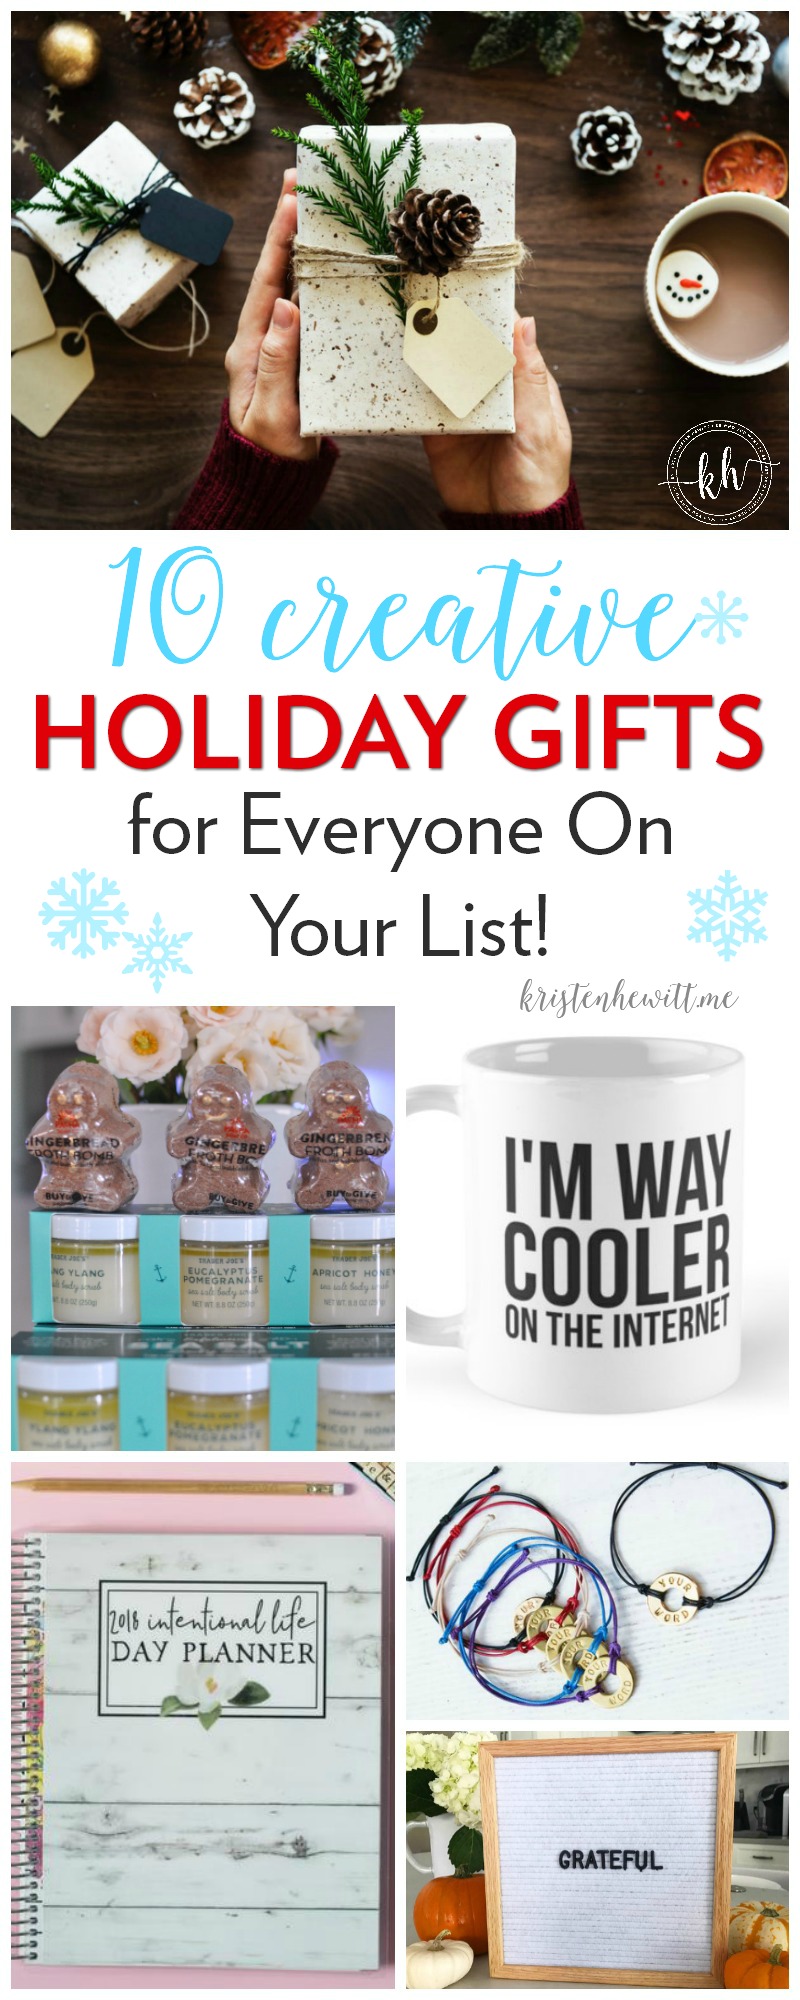 Looking for some holiday gifts this season that are creative and thoughtful and won't break the bank? Start here! Happy shopping!